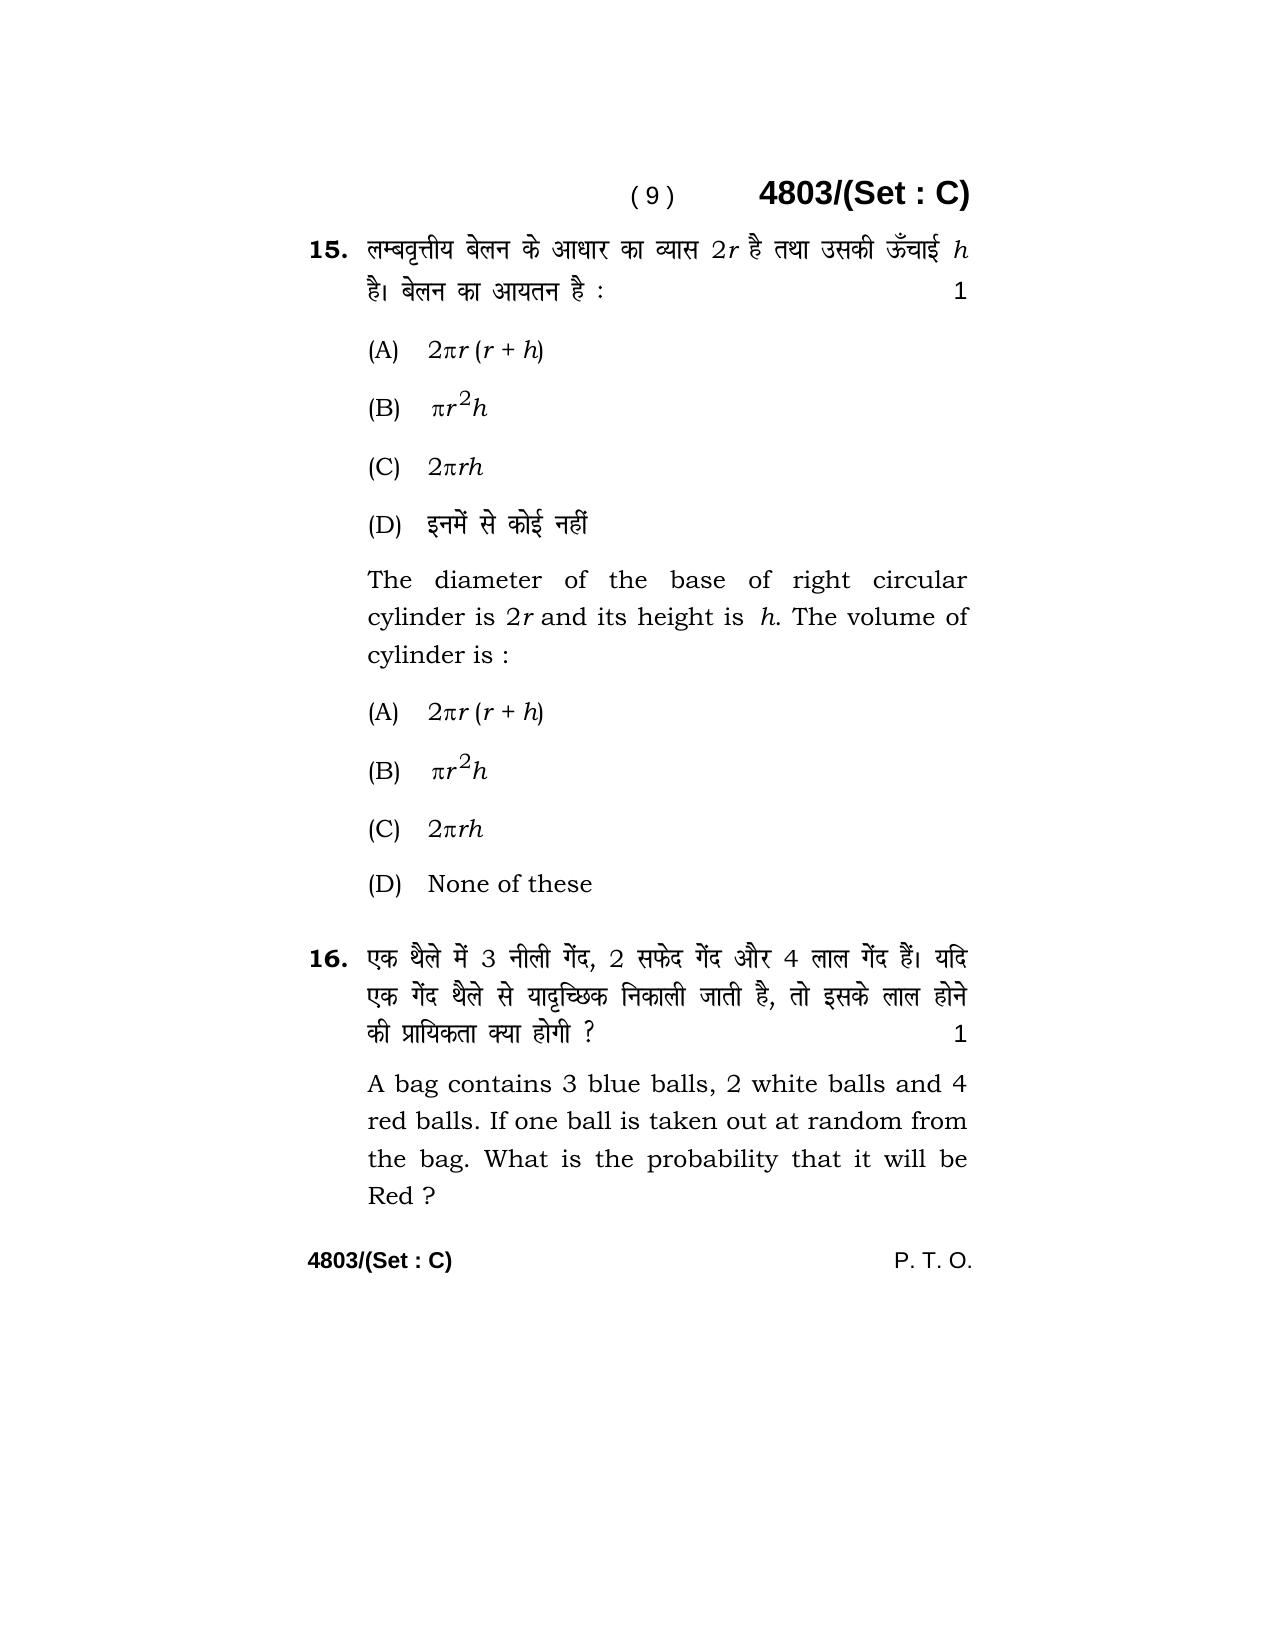 Haryana Board HBSE Class 10 Mathematics 2020 Question Paper - Page 41